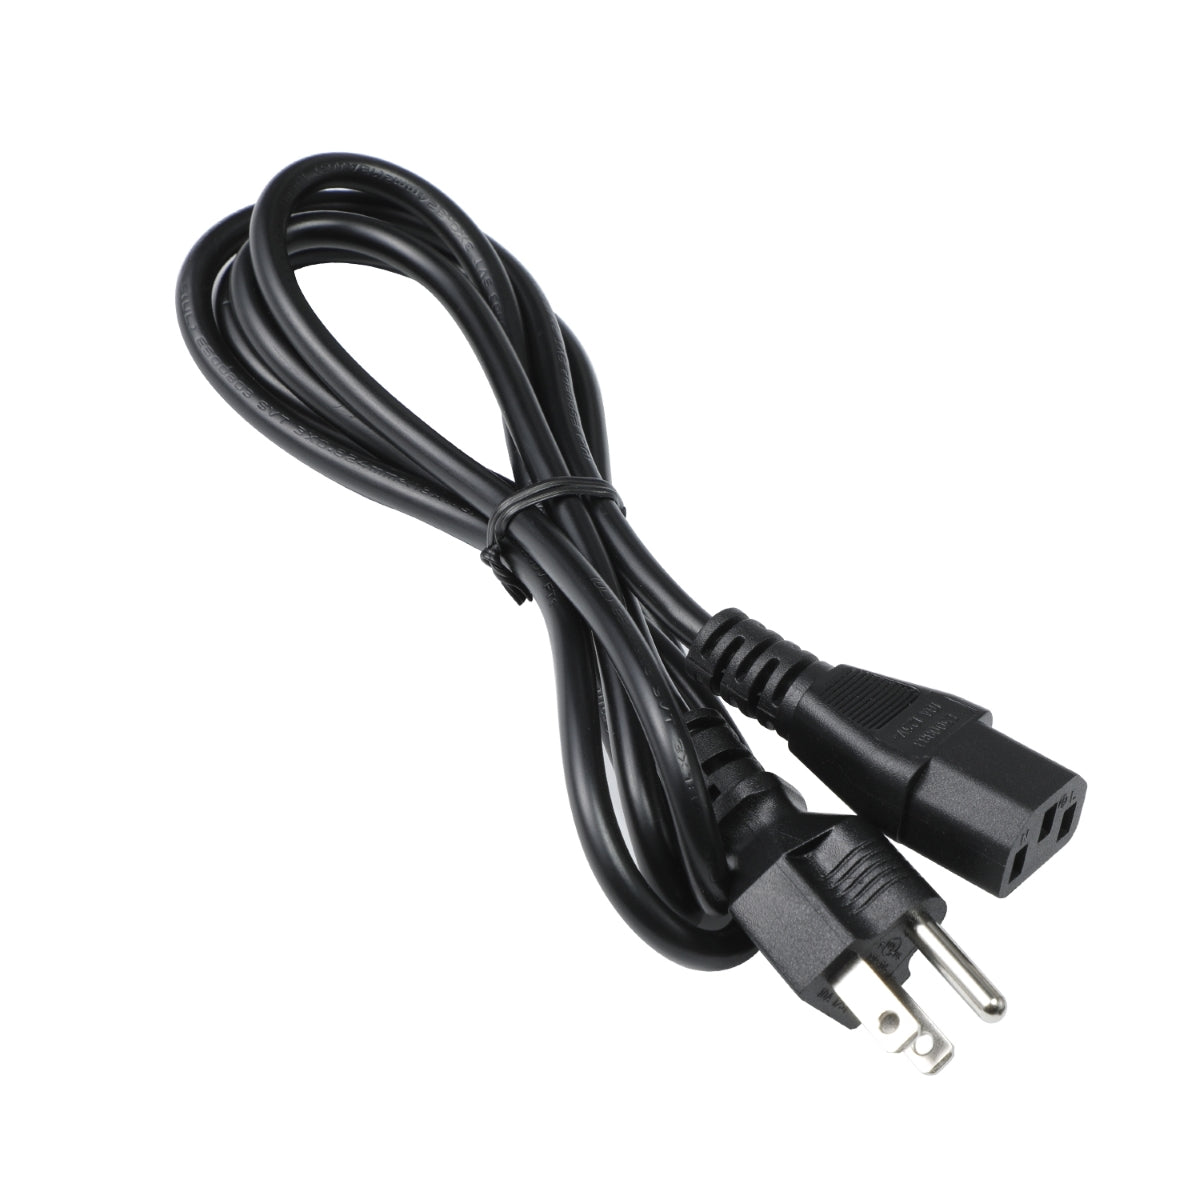 Power Cord for Dell SE2716H Monitor